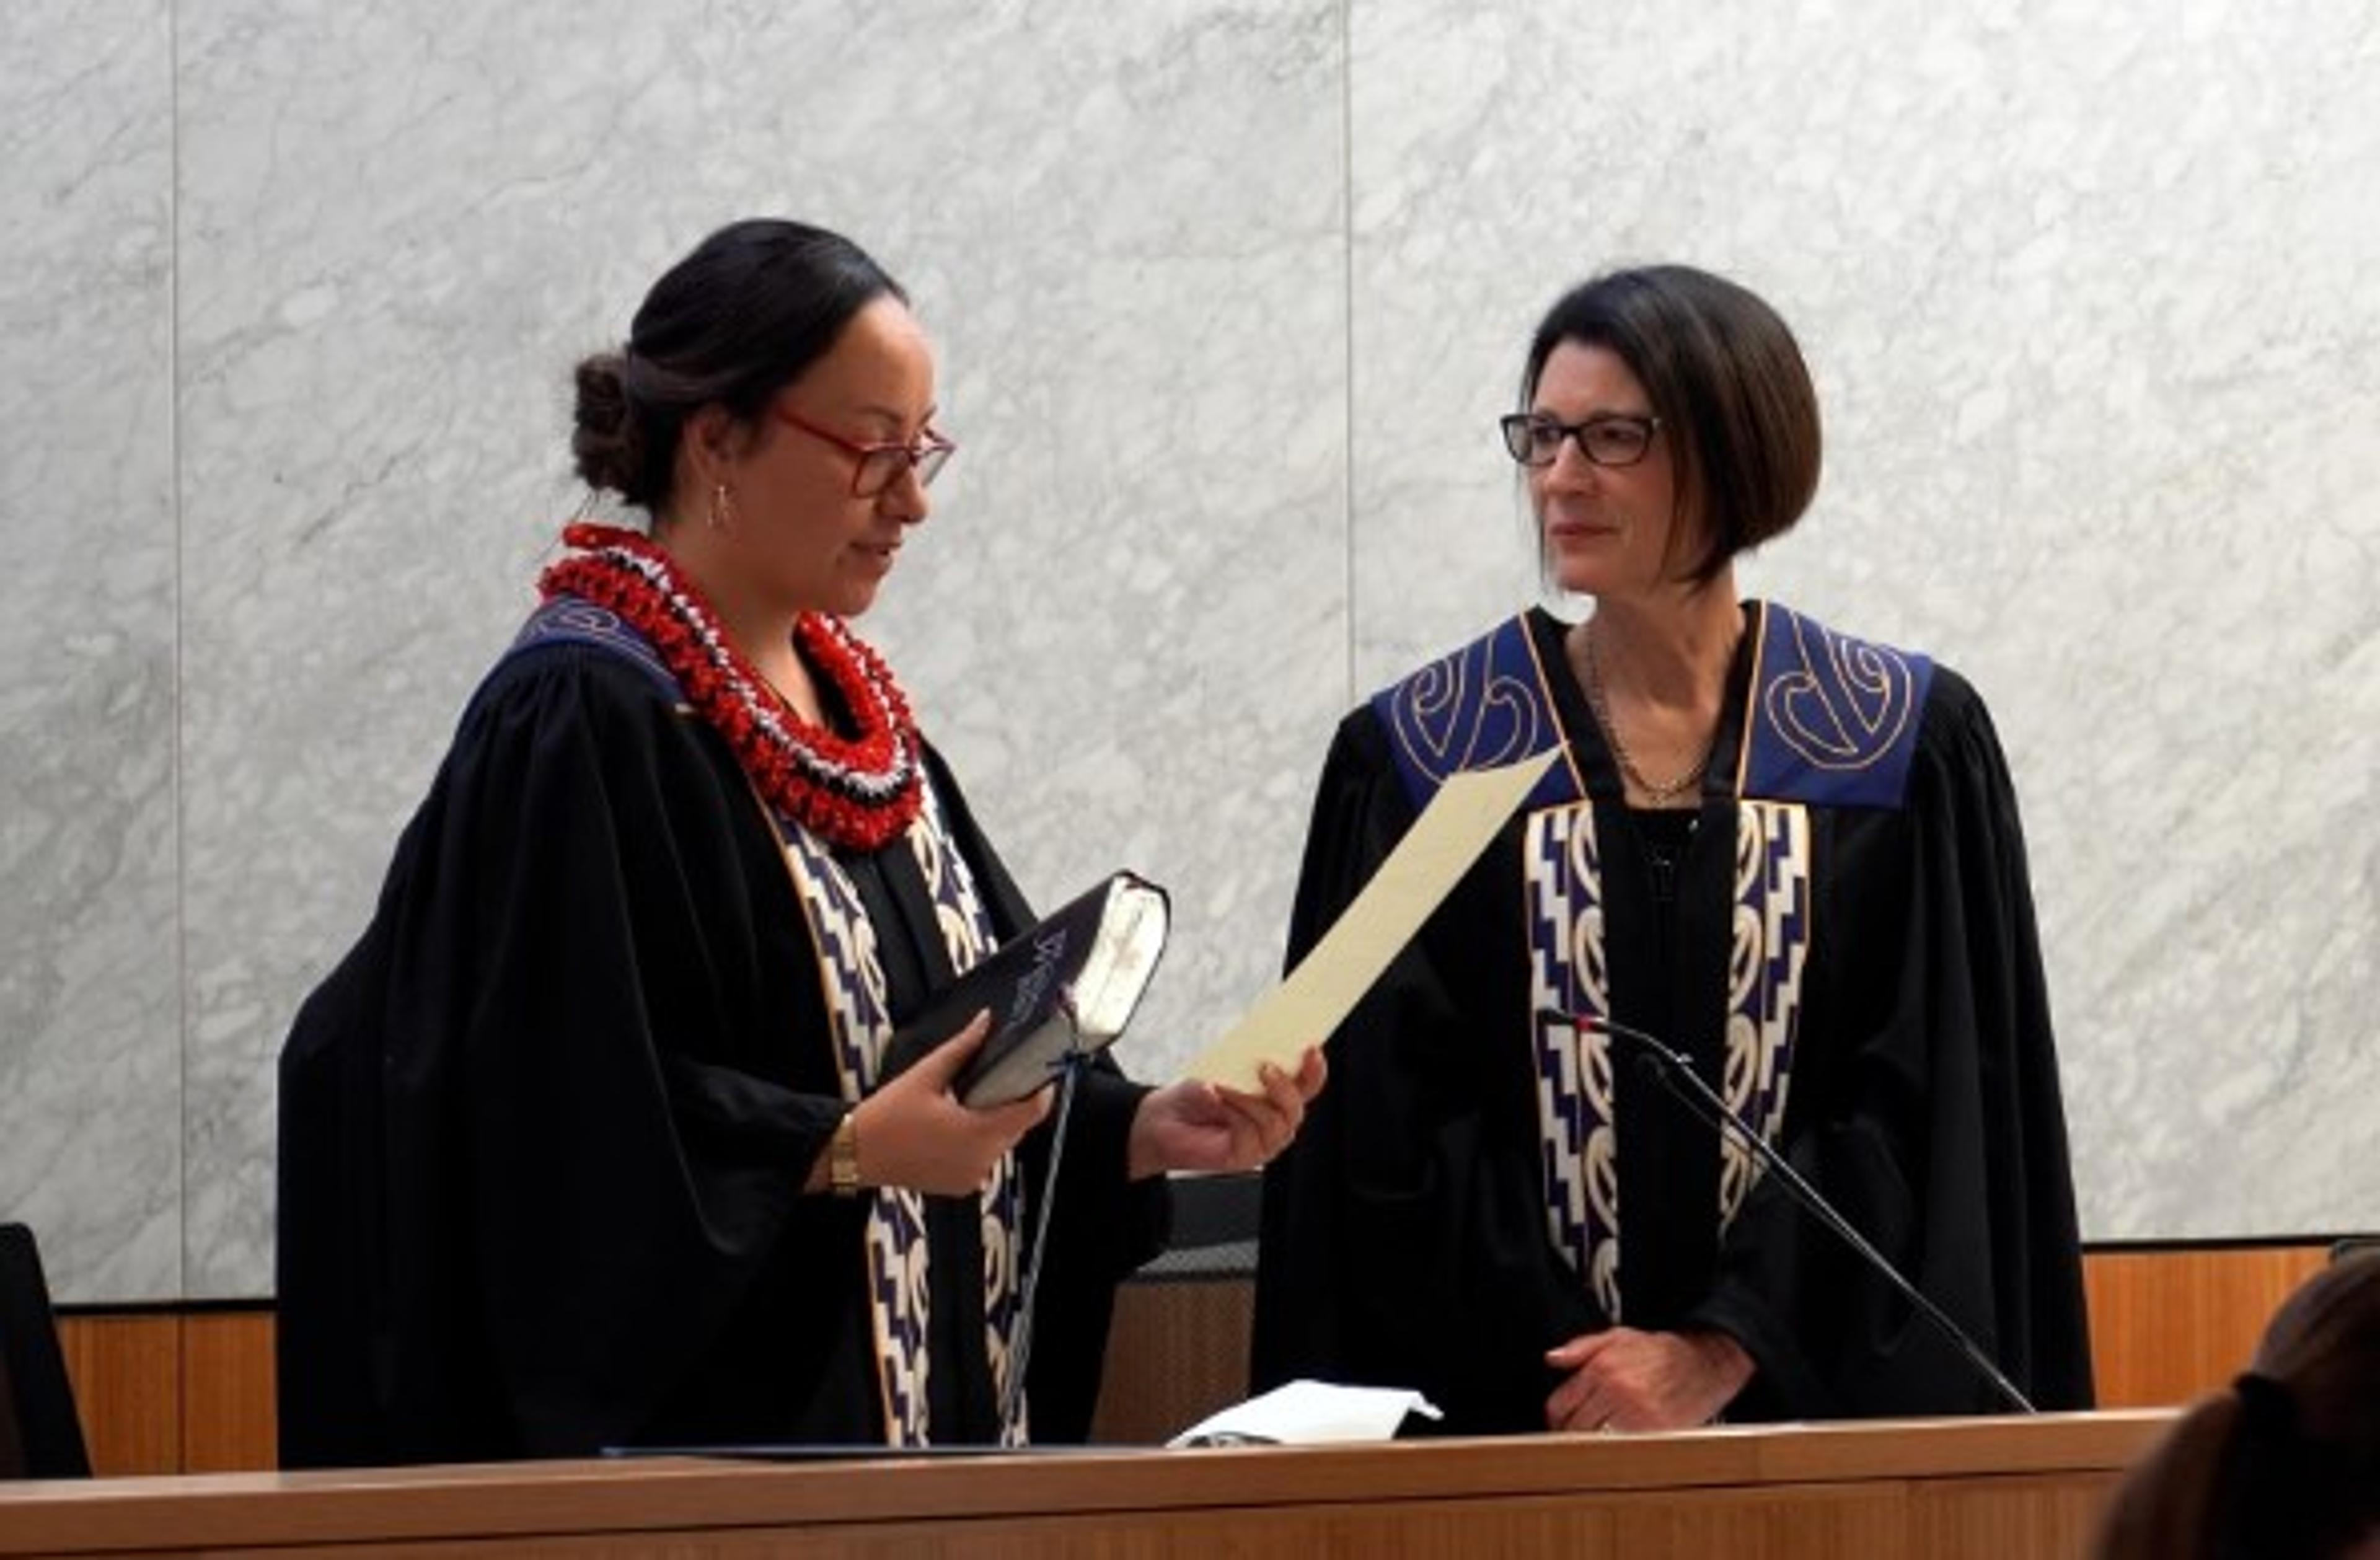 Tania Sharkey, being sworn in as a District Court Judge. Photo/PMN News/Khalia Strong